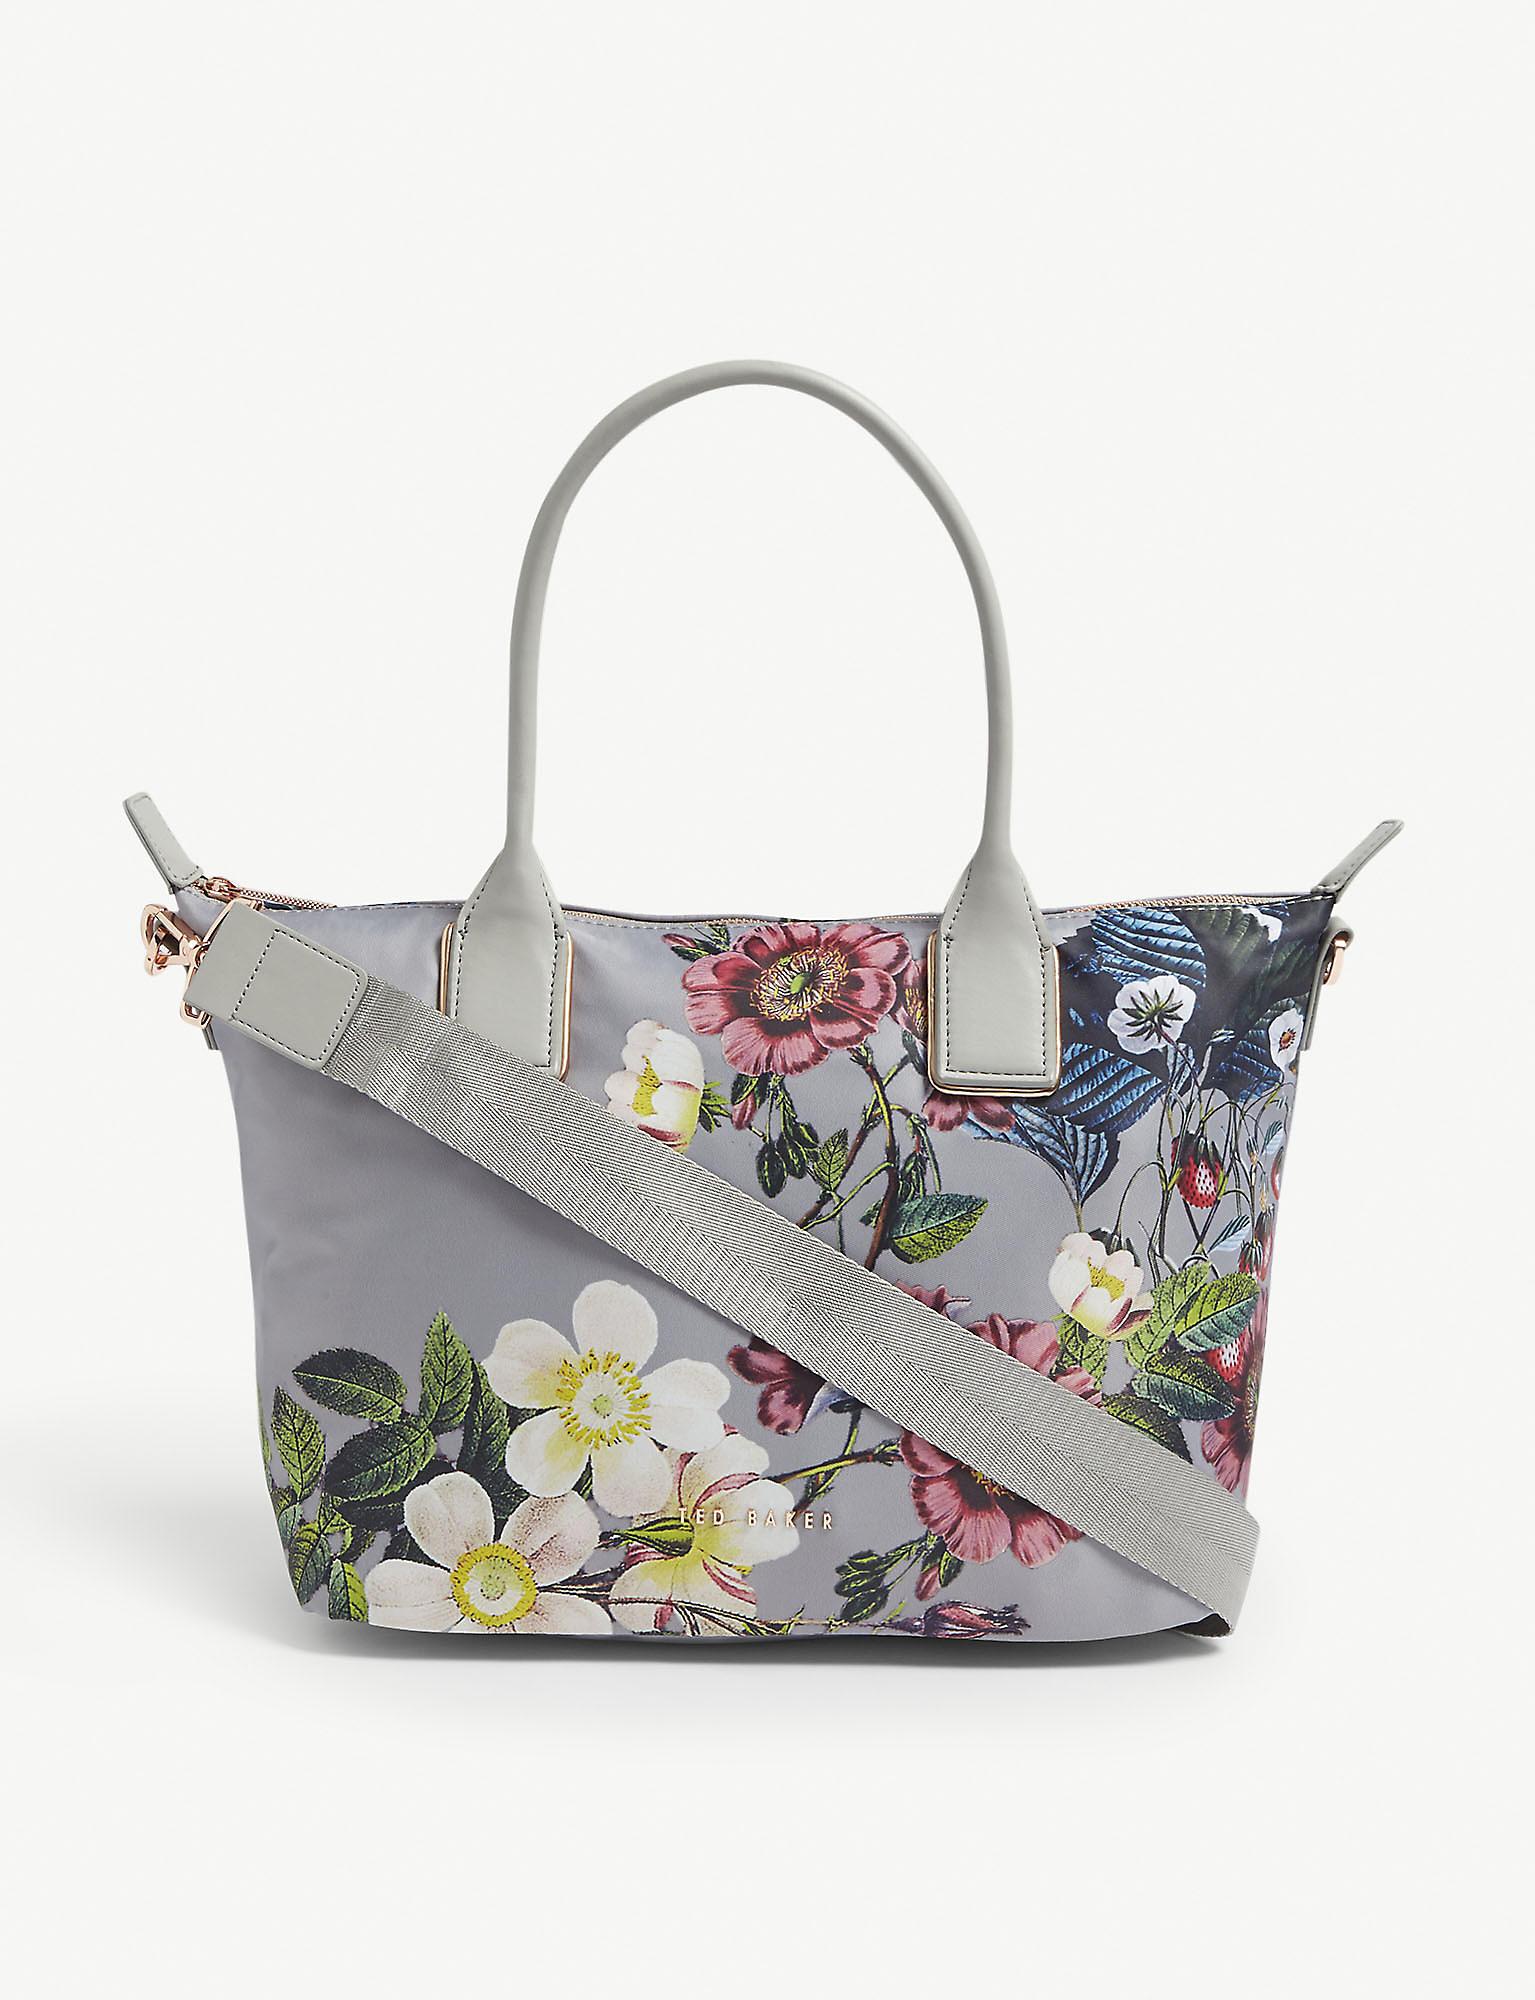 Ted Baker Purse Australia | Literacy Ontario Central South